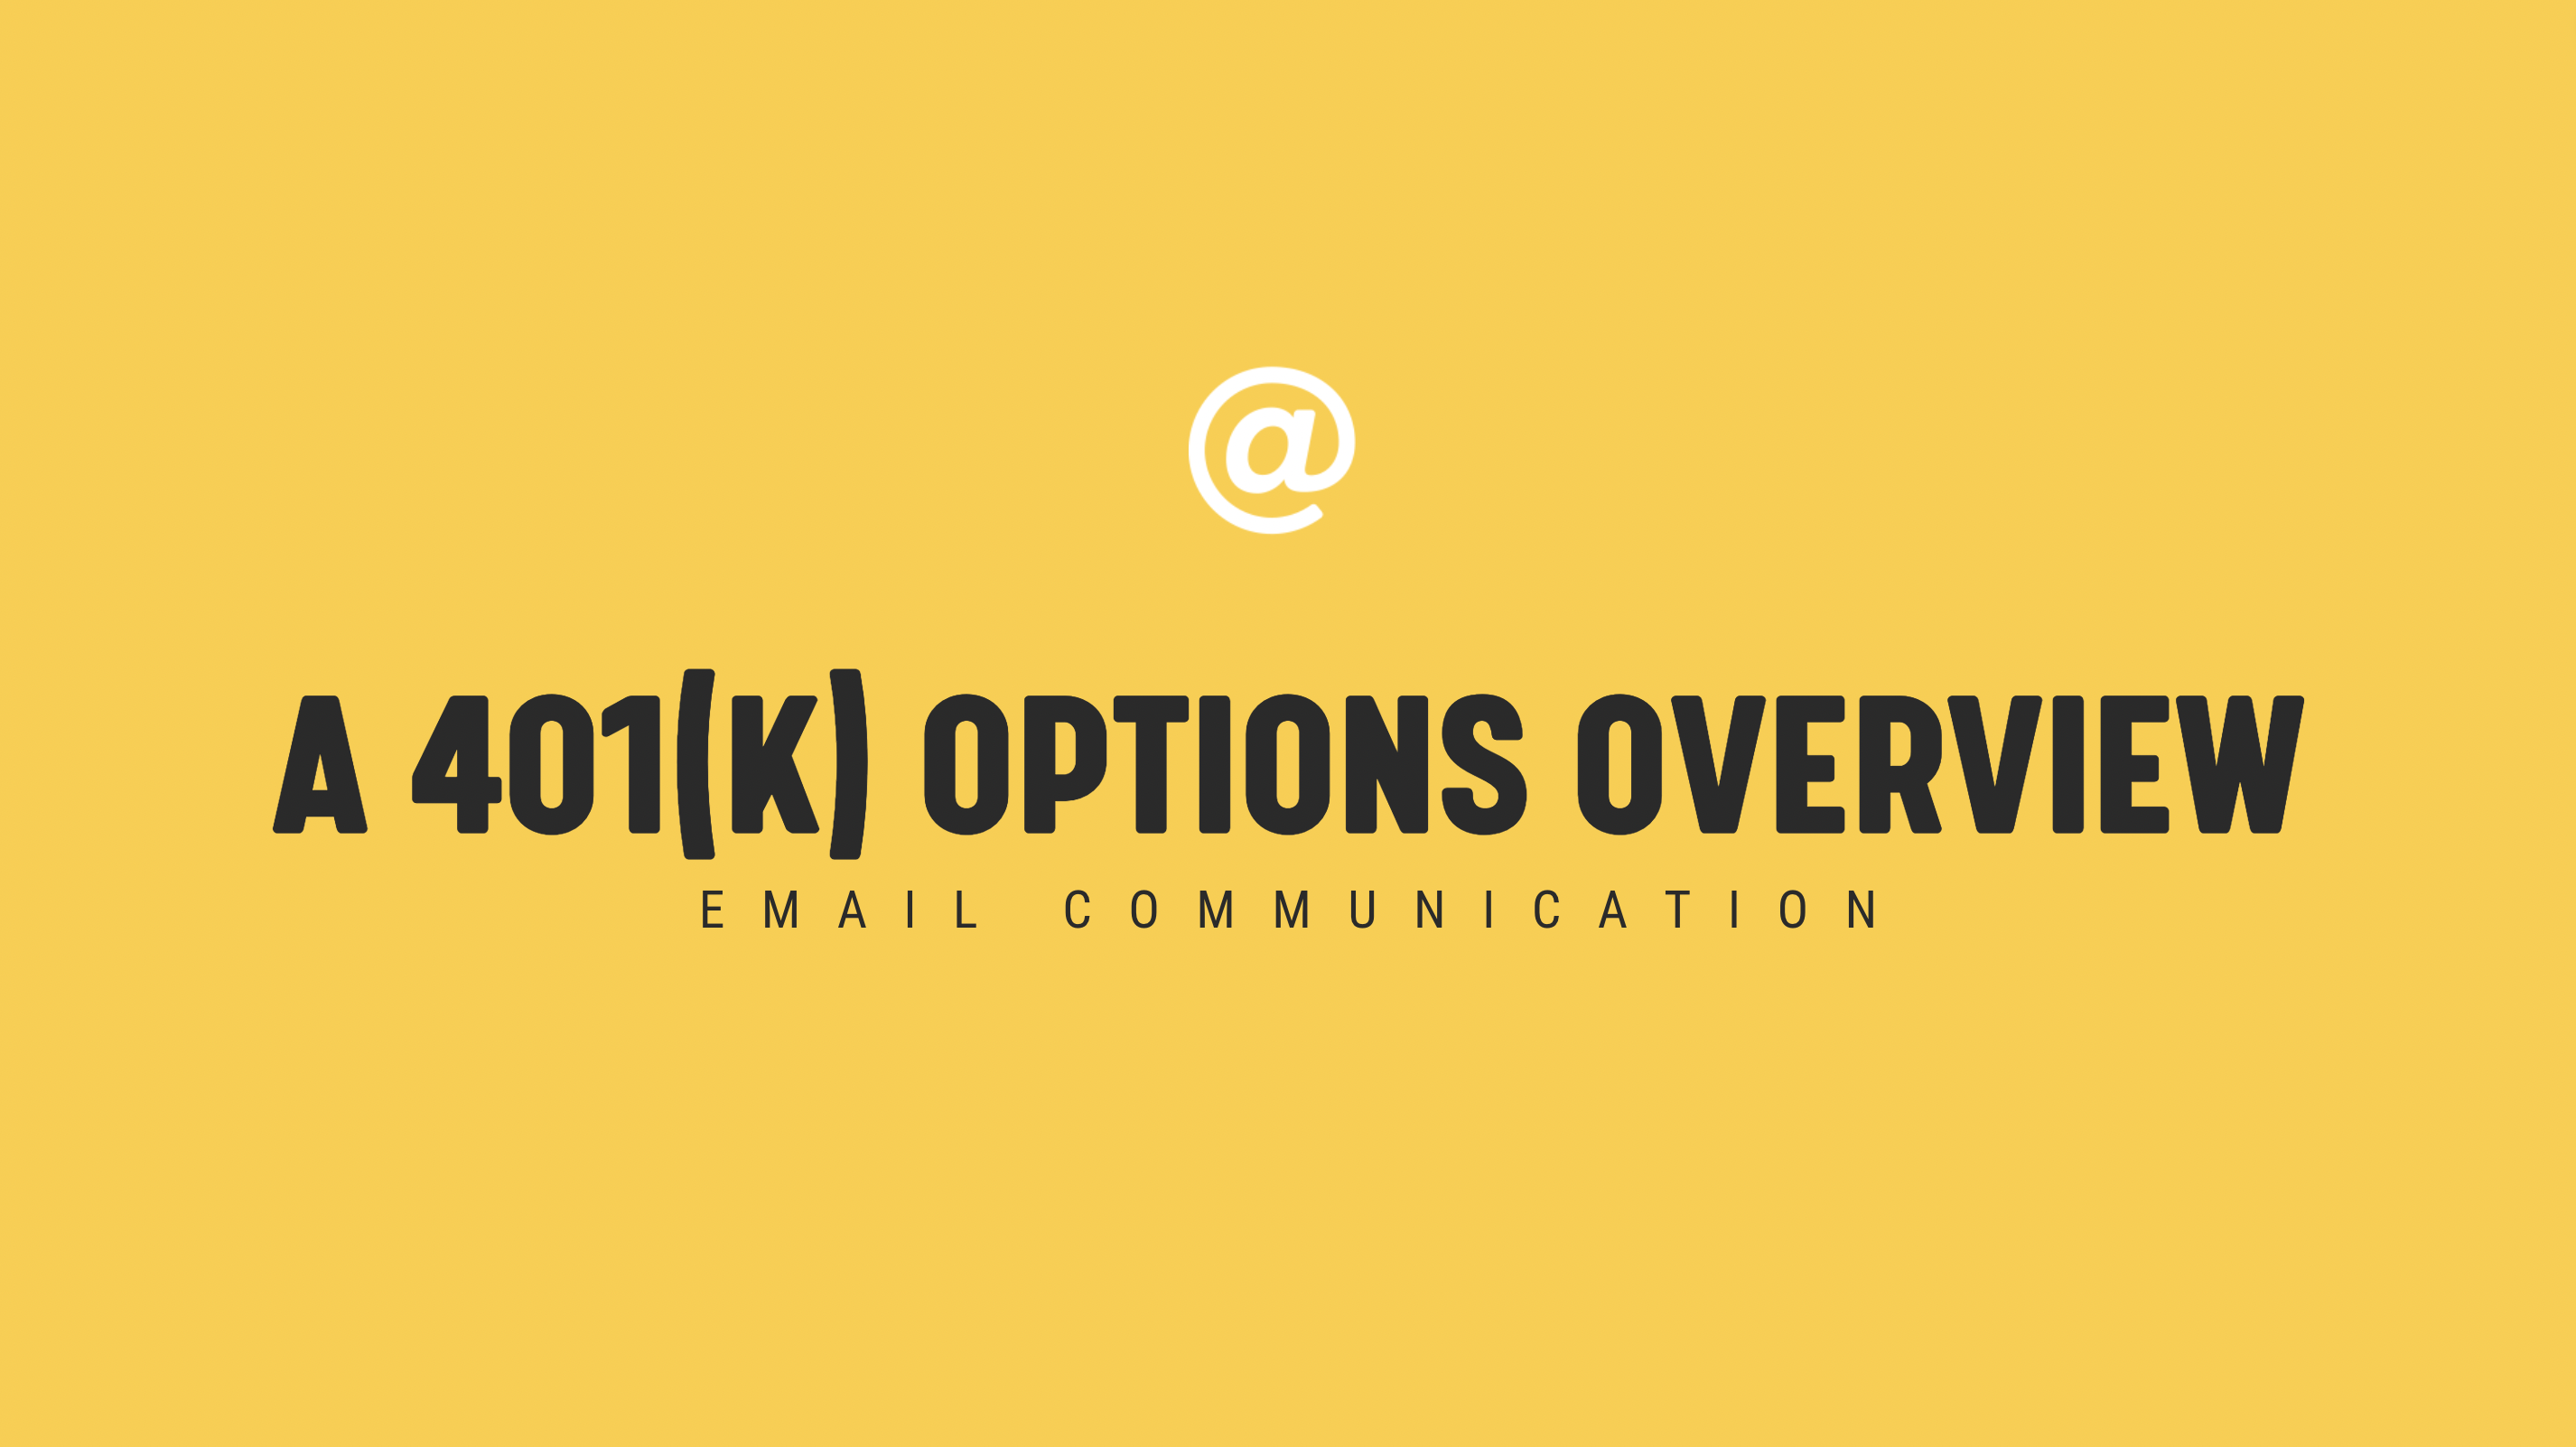 [NEW] A 401(k) Options Overview - Single Email